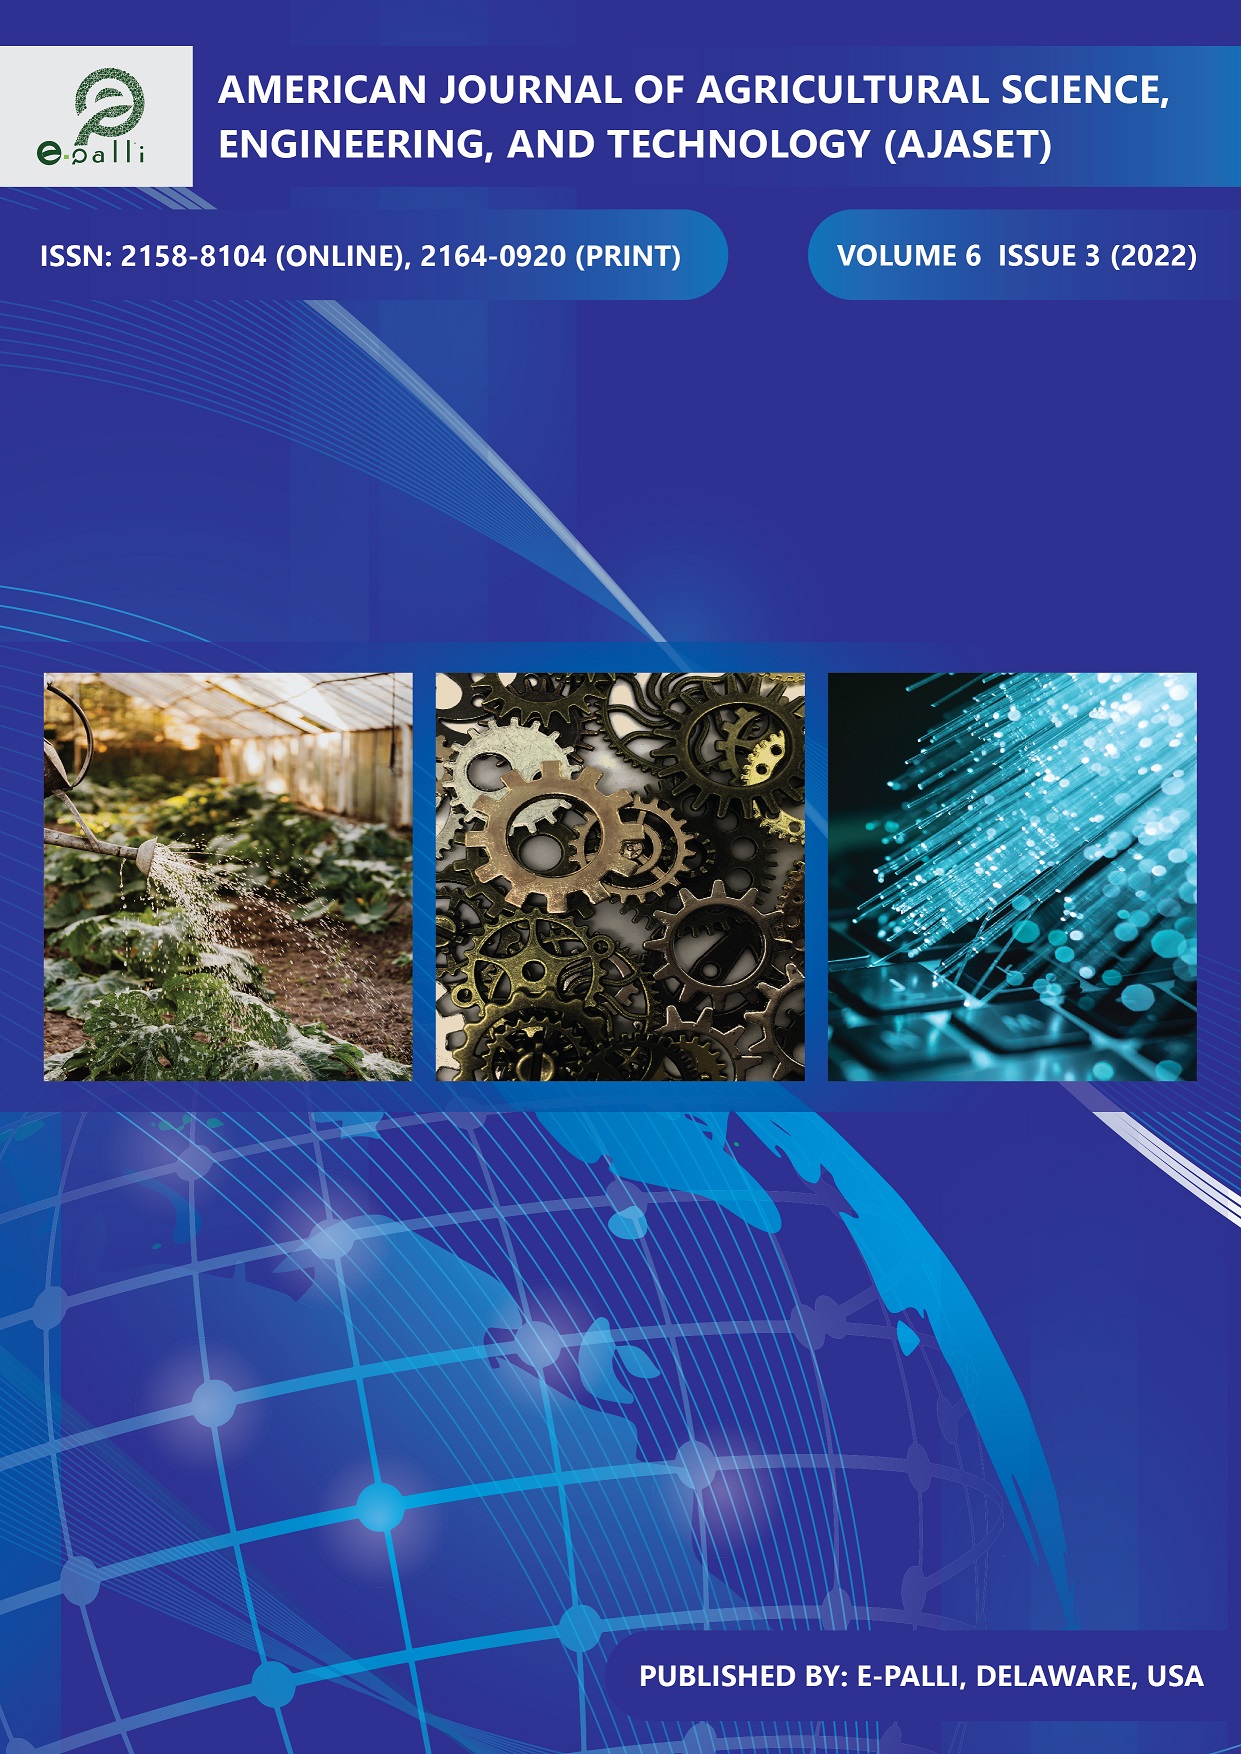 					View Vol. 6 No. 3 (2022): American Journal of Agricultural Science, Engineering, and Technology
				